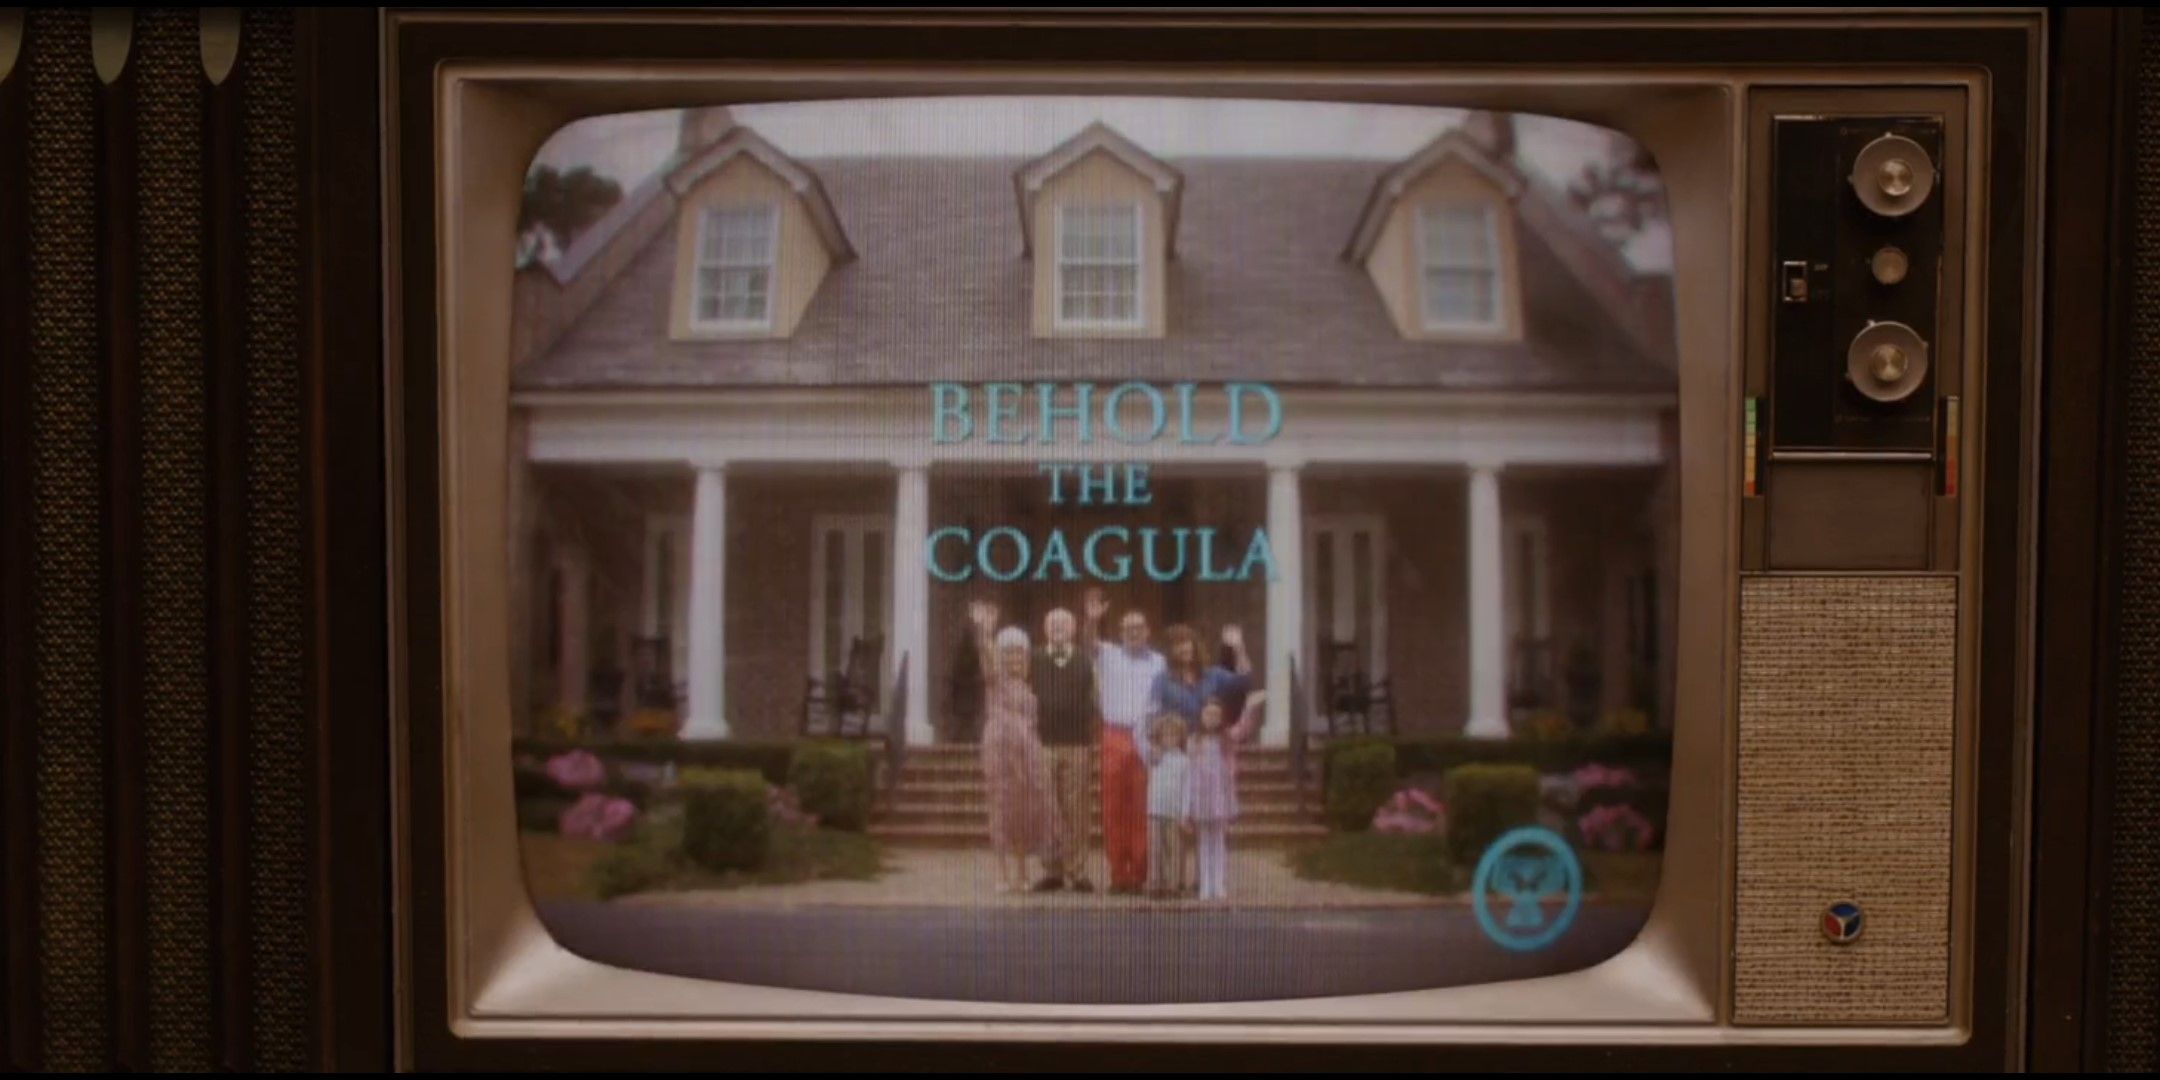 TV screen with the text 'Behold The Coagula' in Get Out